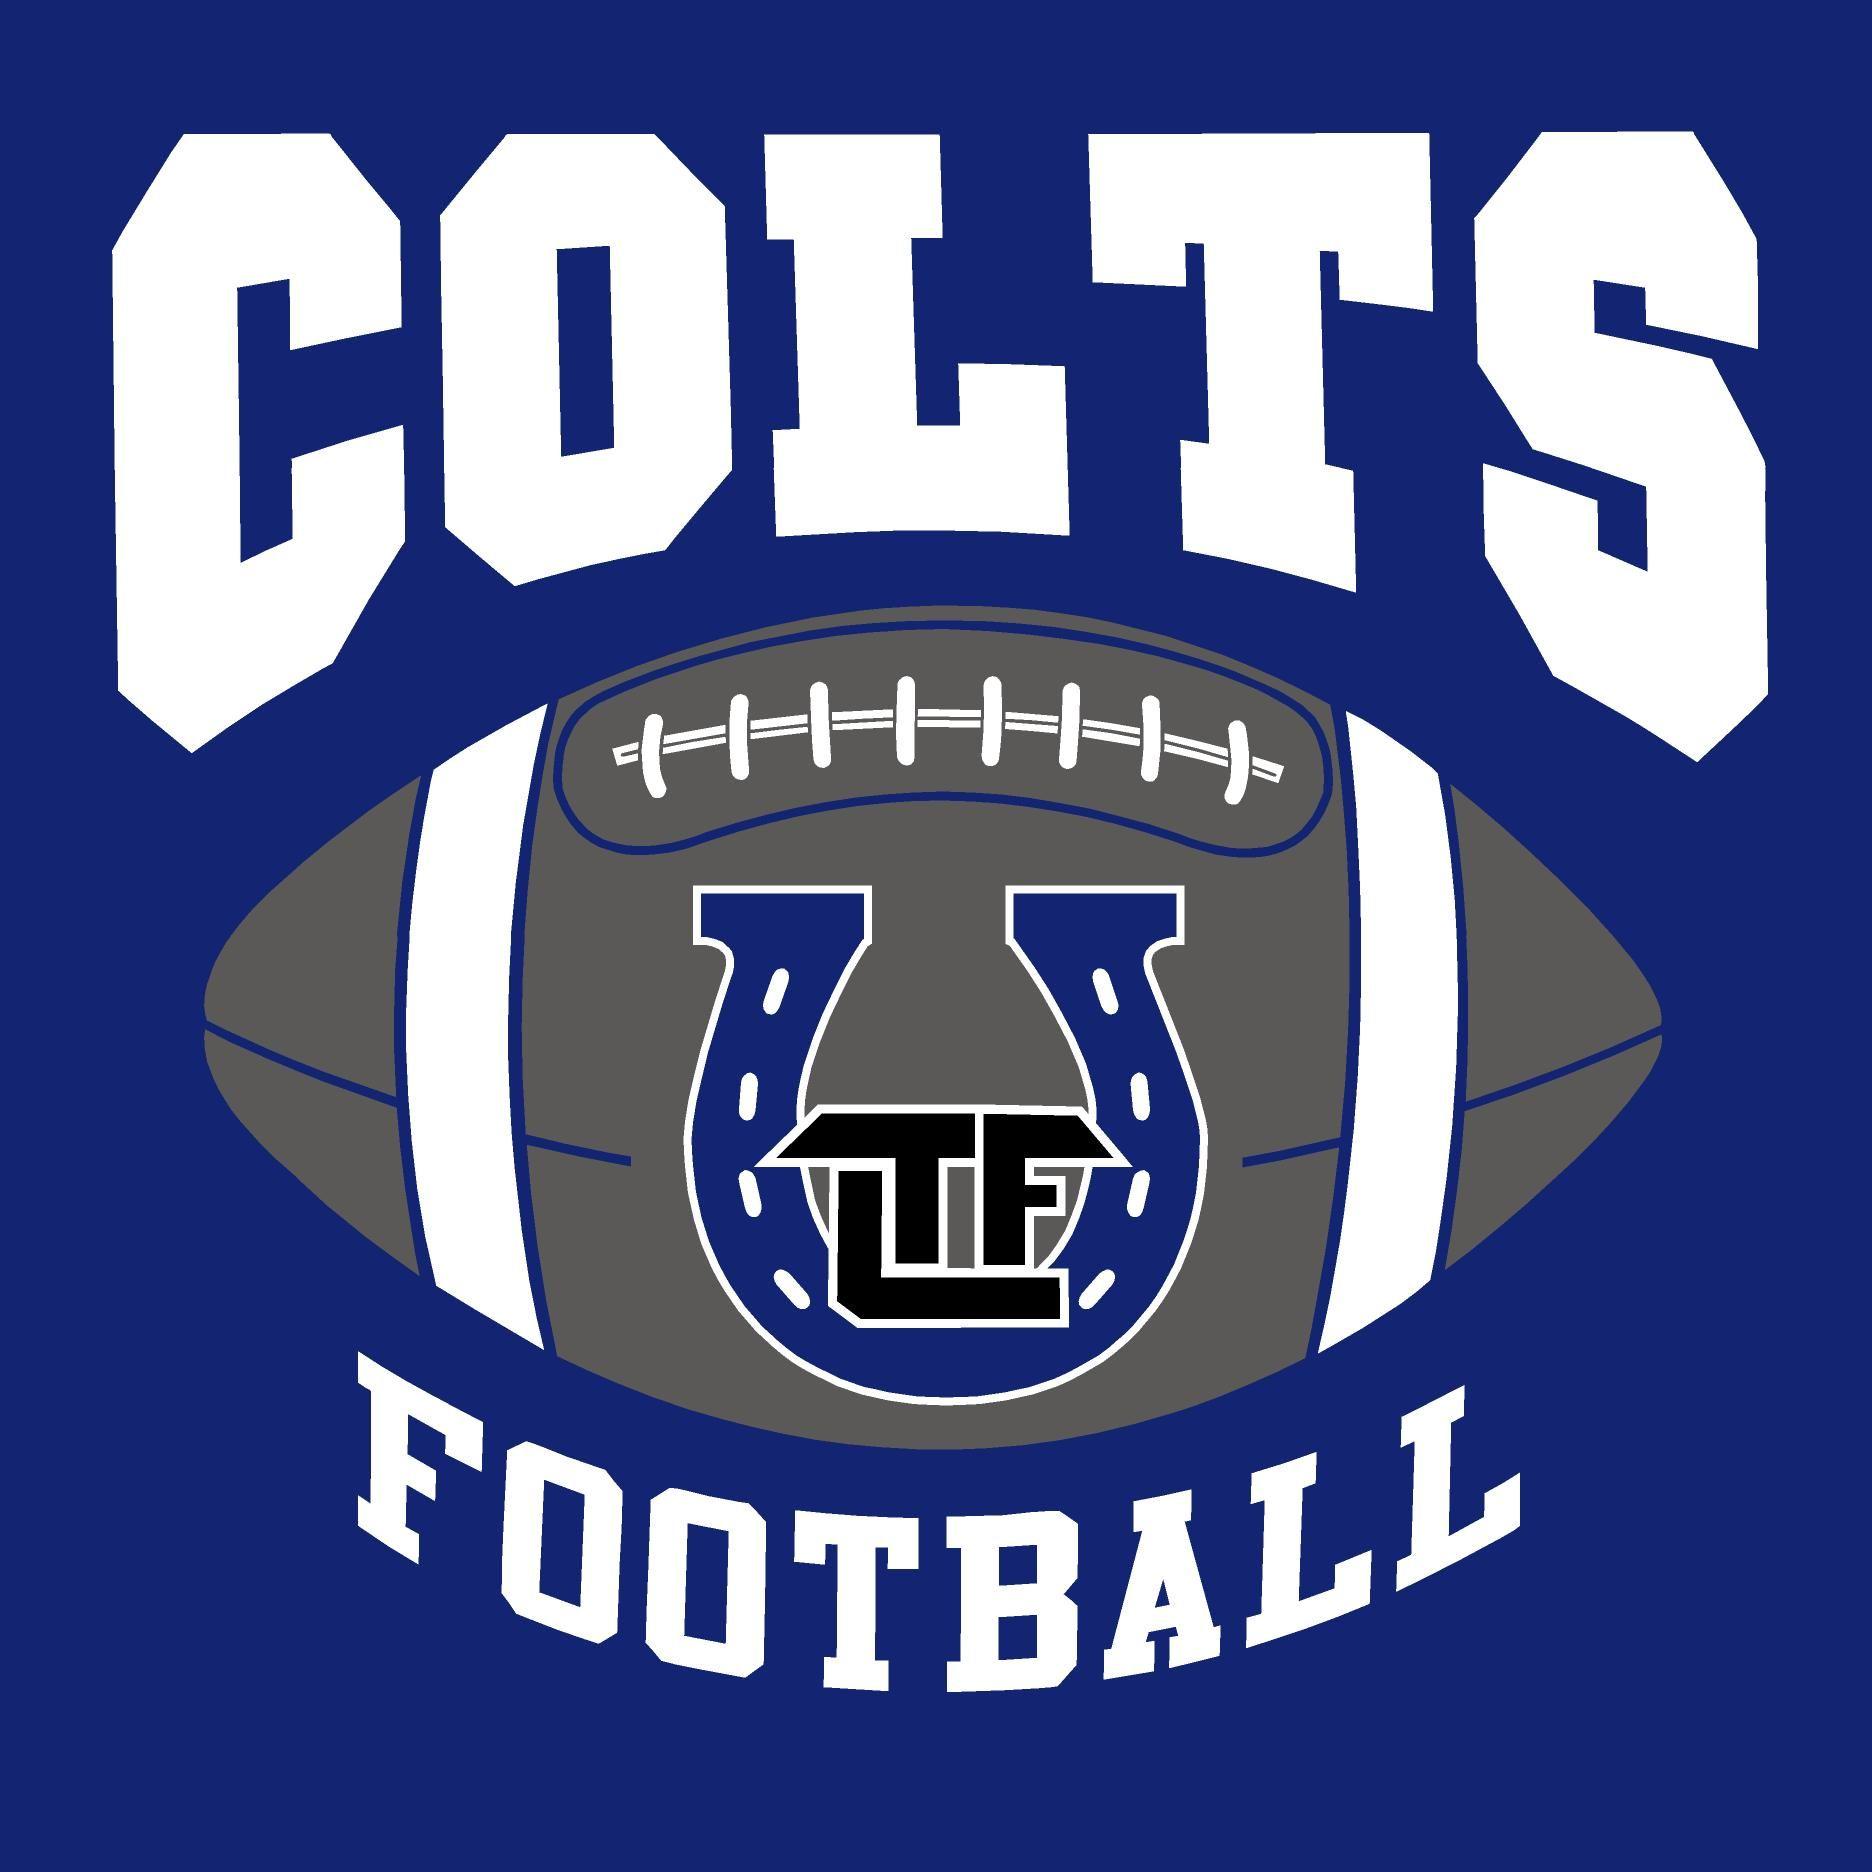 Colts Football Logo - image of the colts football team logo. Colts. SPORTS